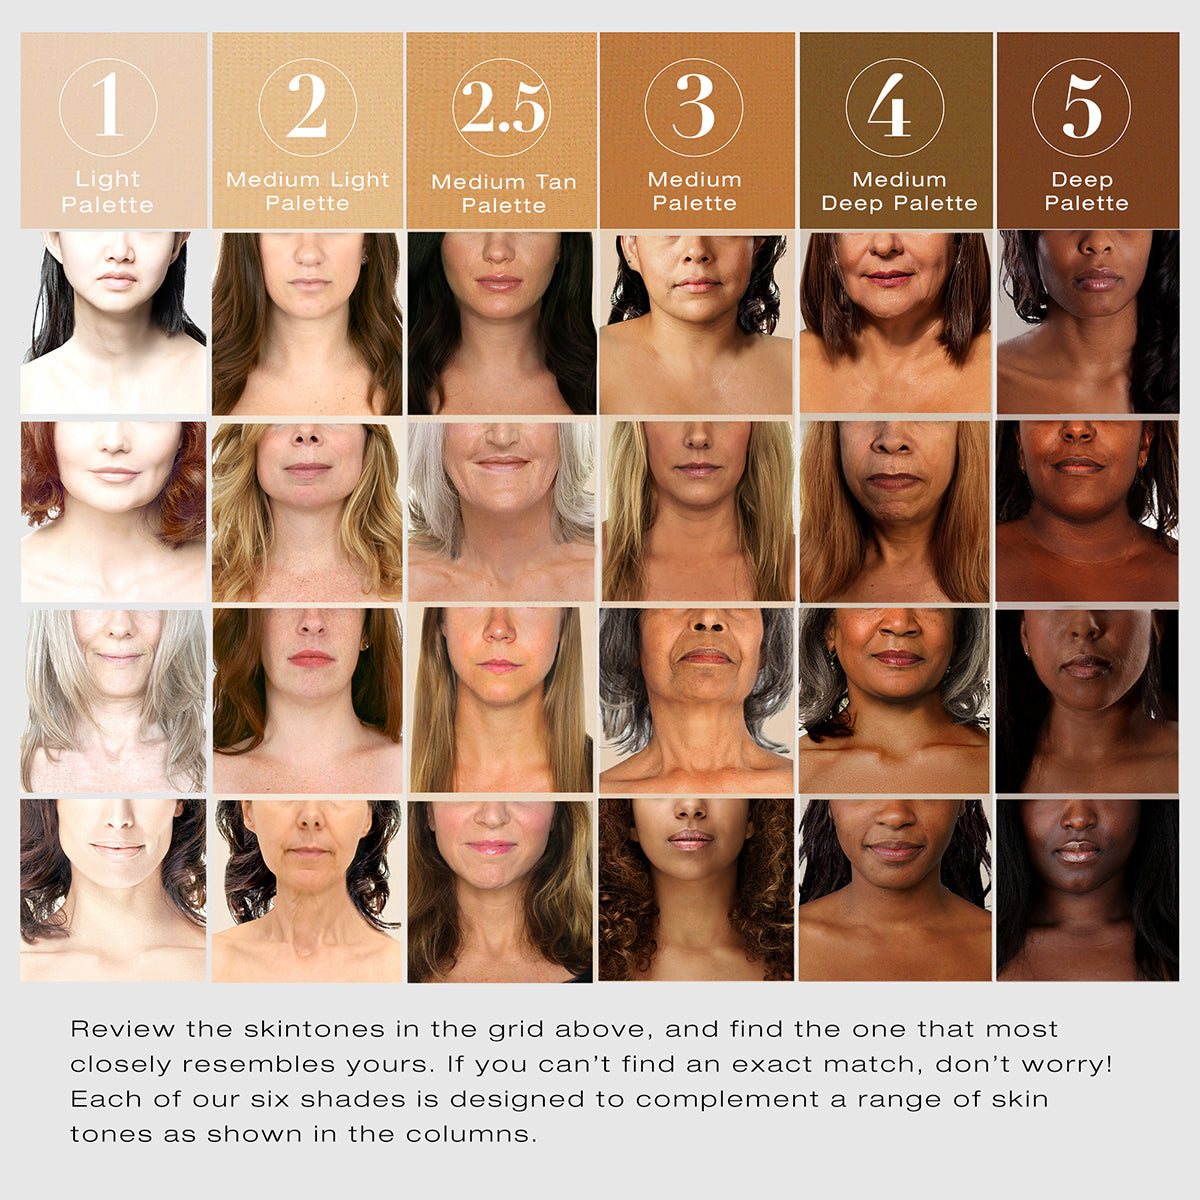 Color chart to assist with shade matching. Shows various models to assist with shade selection. Review the skintones in the grid above, and find the one that most closely resembles yours. If you can't find an exact match, don't worry! Each of our six shades is designed to complement a range of skin tones as shown in the columns. 1 Light palette, 2 Medium LIght palette, 2.5 Medium tan palette, 3 medium palette, 4 medium deep palette, 5 deep palette